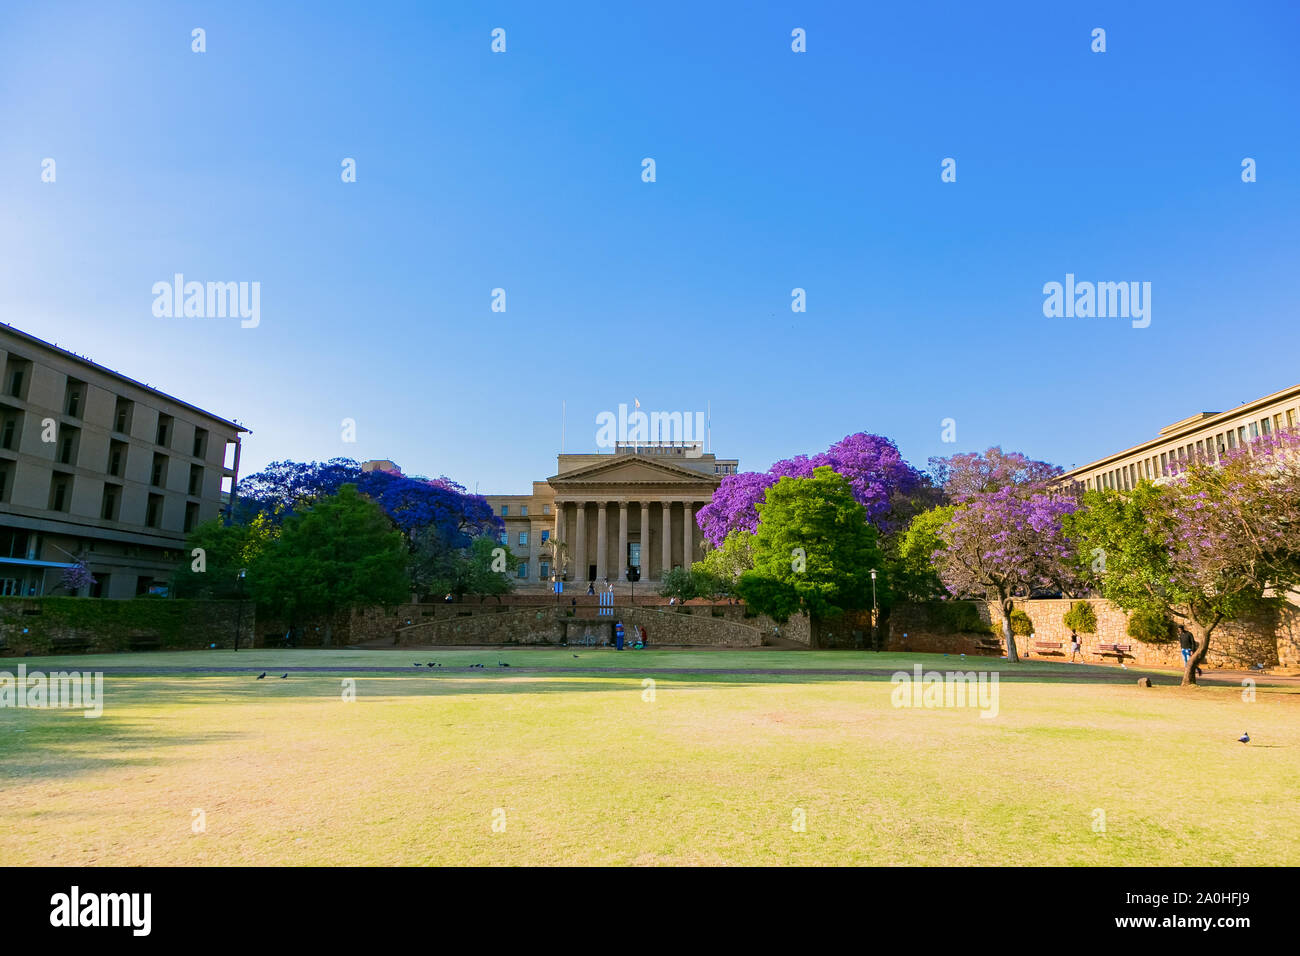 Johannesburg, South Africa - October 09 2018: Exterior view of the Great Hall at the University of the Witwatersrand in Johannesburg South Africa Stock Photo